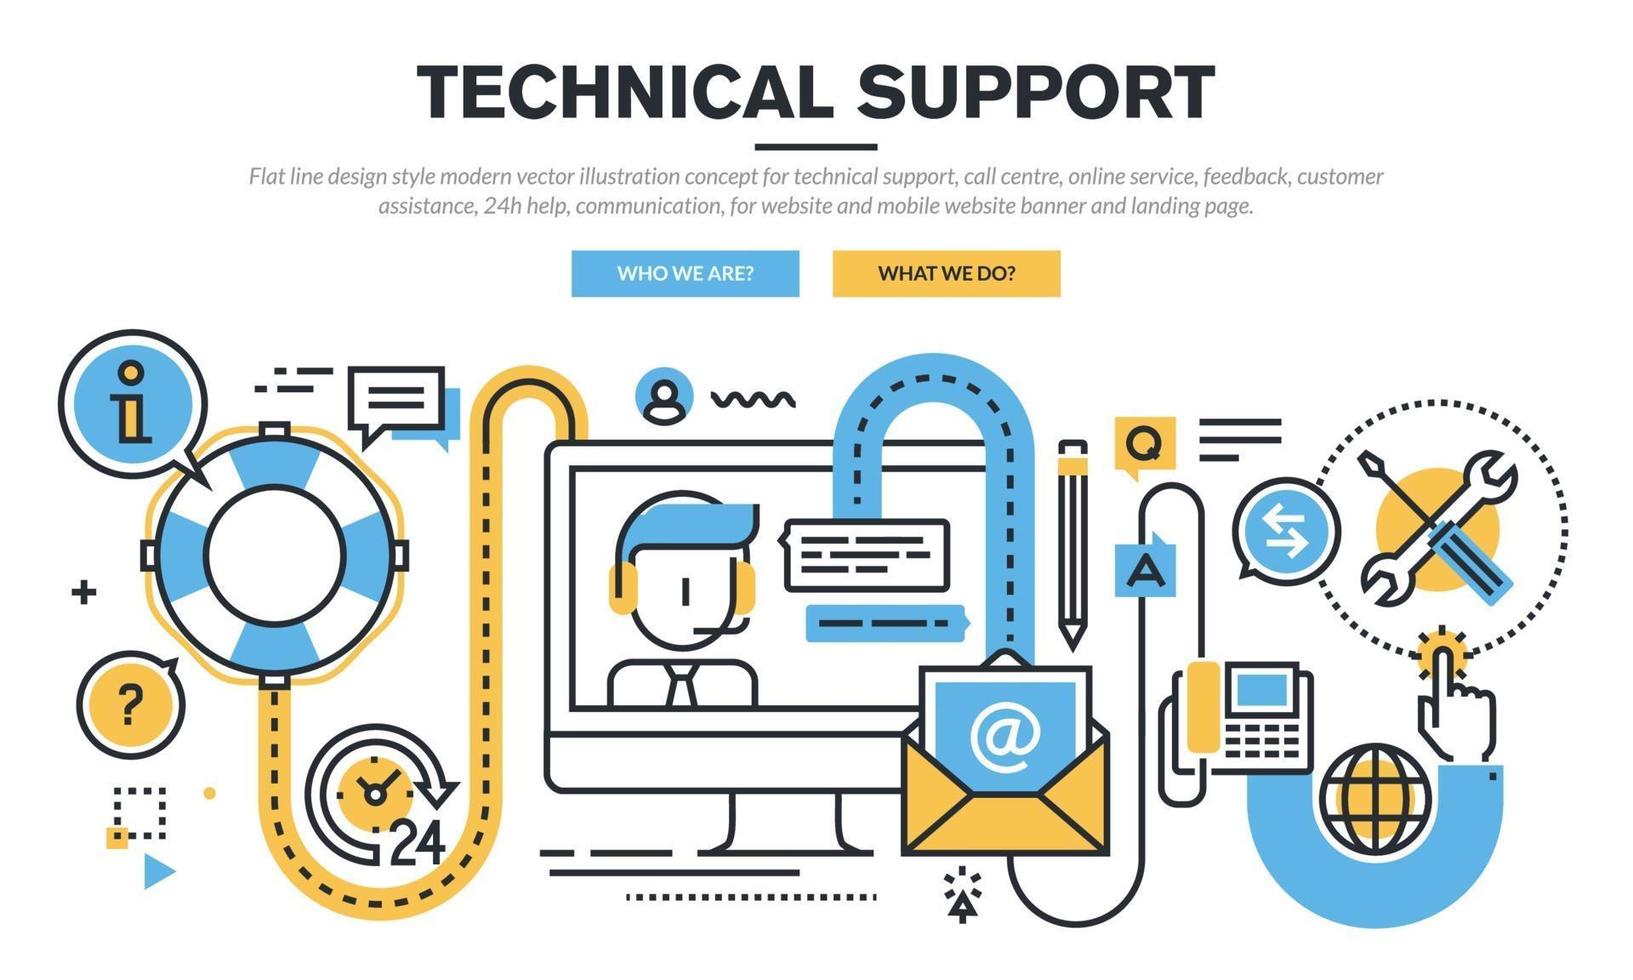 Flat line design style modern vector illustration concept for technical support, call centre, online service, feedback, customer assistance, 24h help, communication, for website and mobile website banner and landing page.